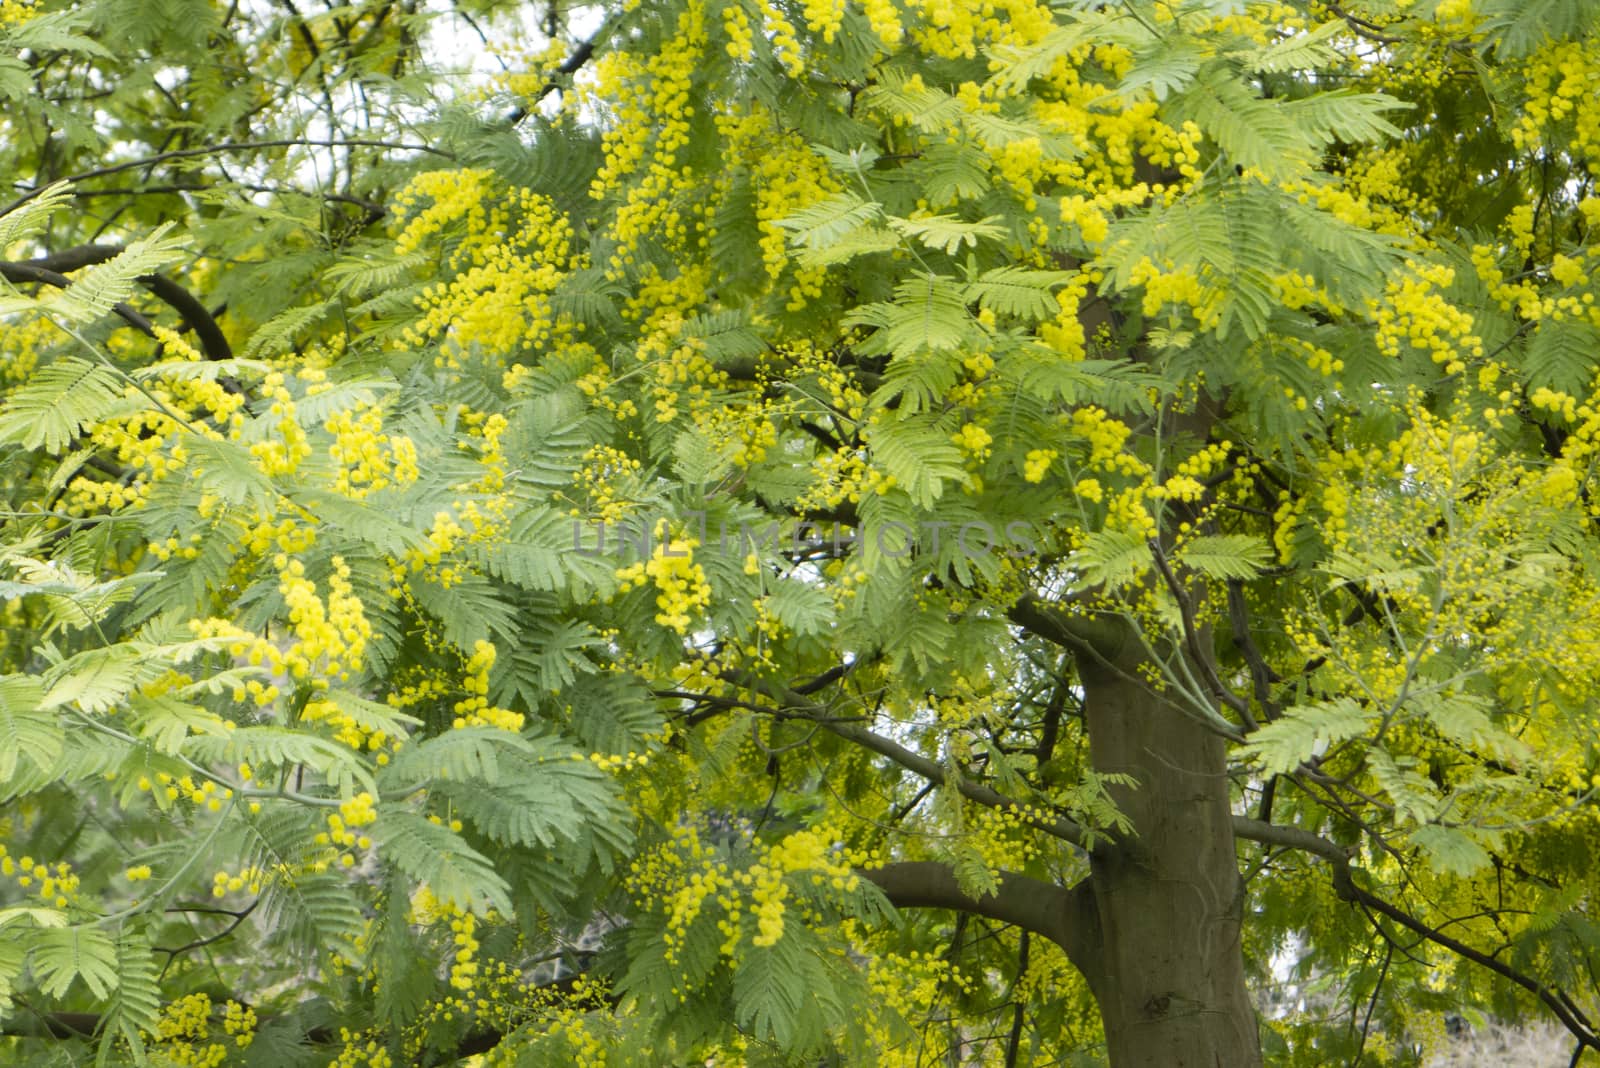 Mimosa, silver blue wattle, Acacia dealbata tree with yellow flowers in full bloom in Spring.